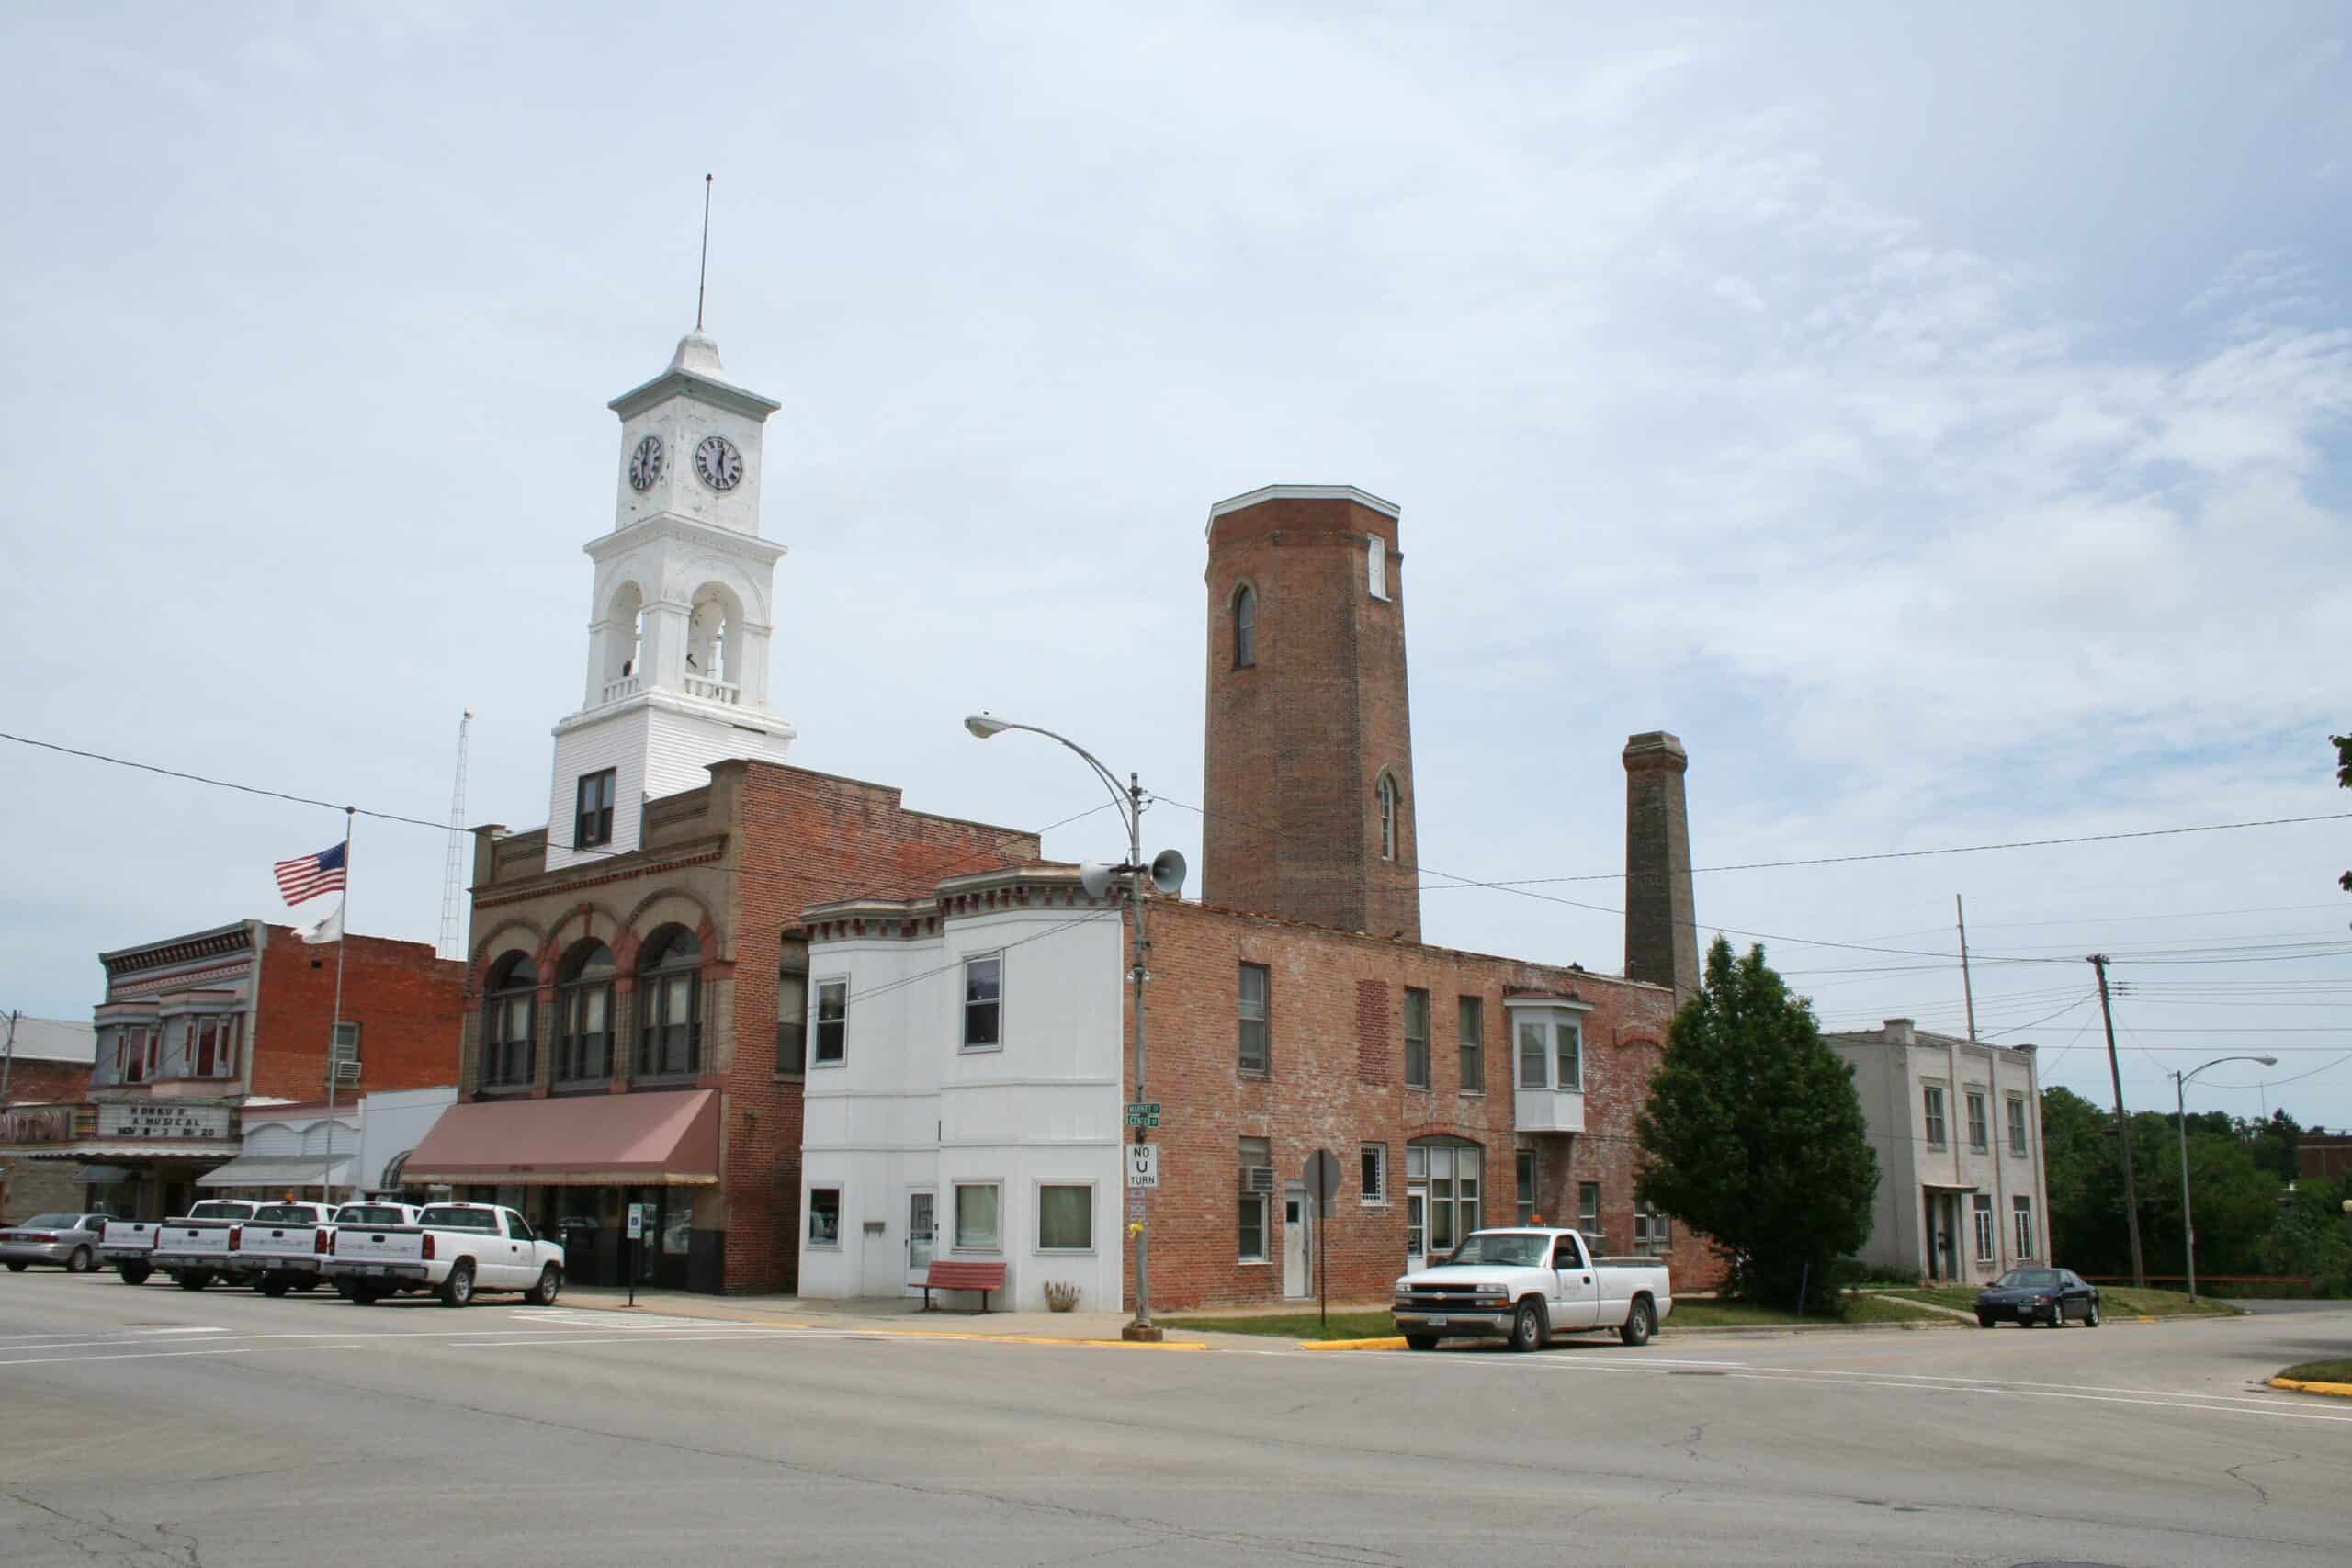 Paxton Illinois Market and Center by Dual Freq